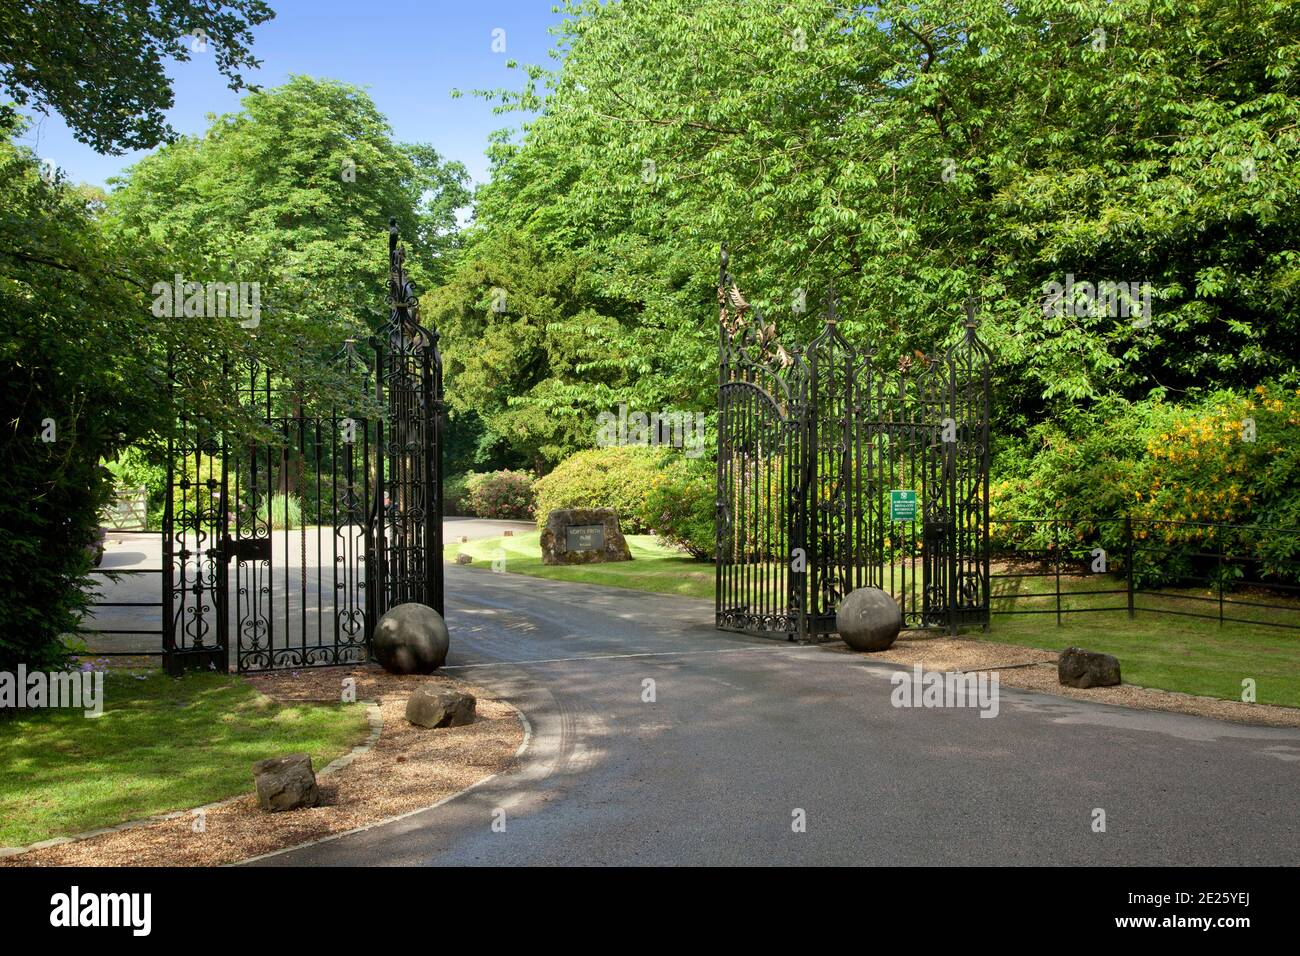 Formal black and gold wrought iron drive gates at entrance to grand  property Stock Photo